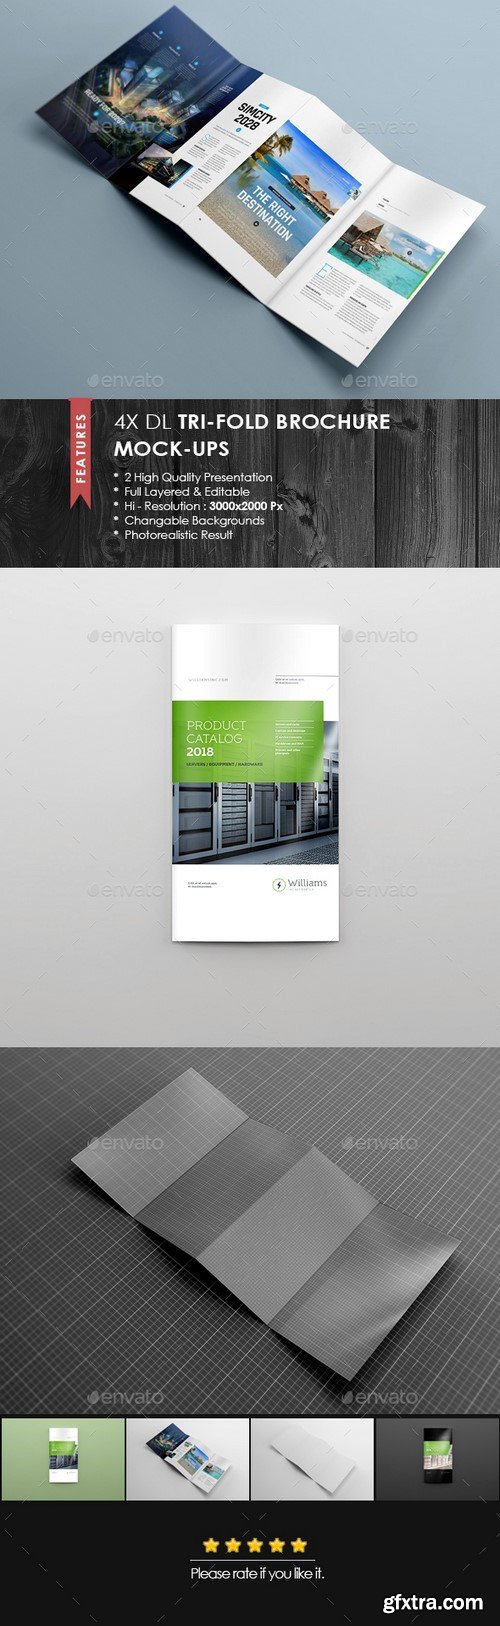 GraphicRiver - 4xDL Double Gate Fold Brochure Mock-up 5 - 16574193